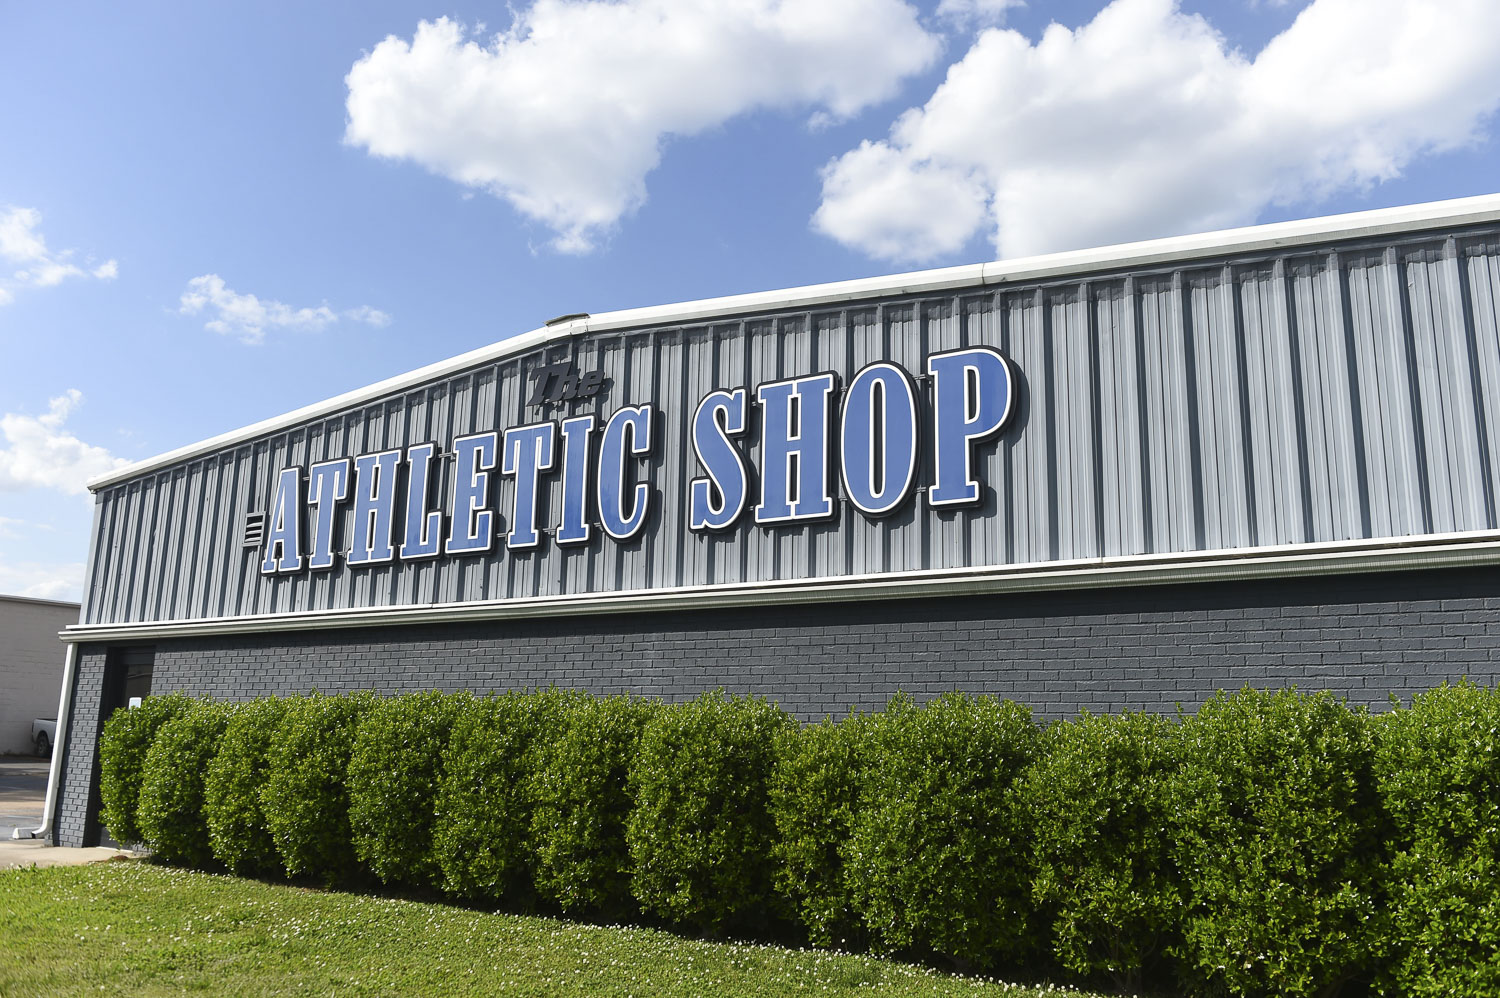 The Athletic Shop